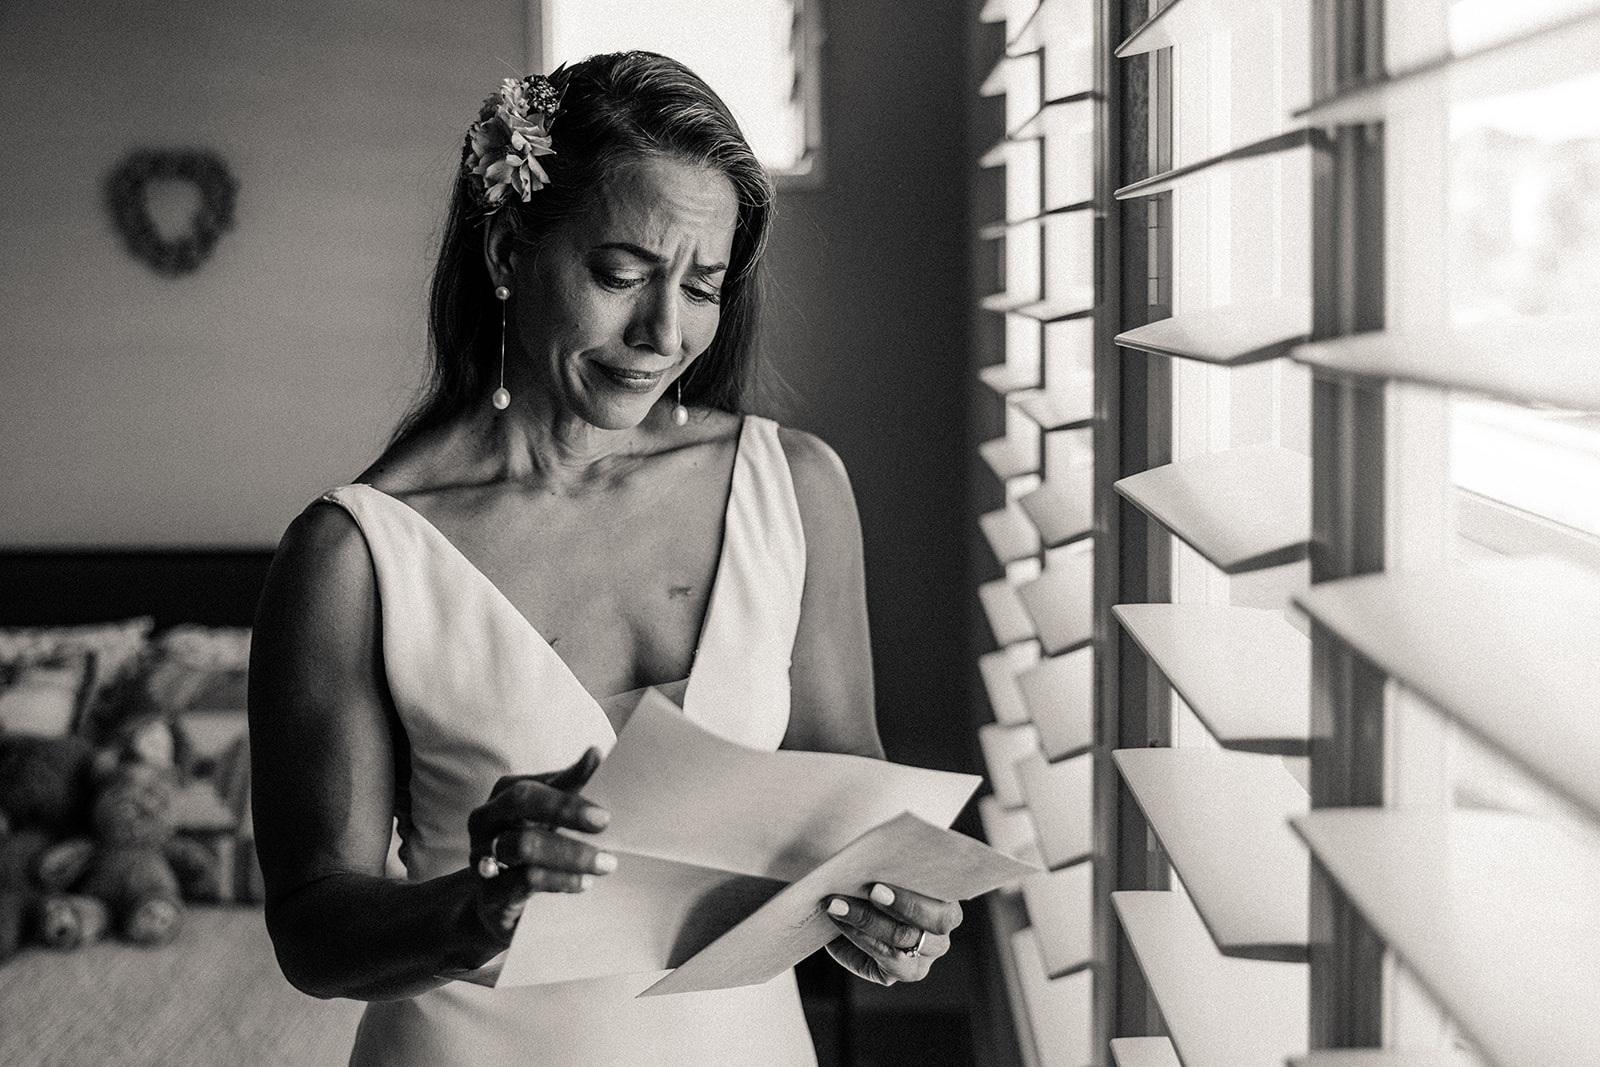 The bride tearfully reading a letter from her groom while she stands in front of a large window, showered in light.